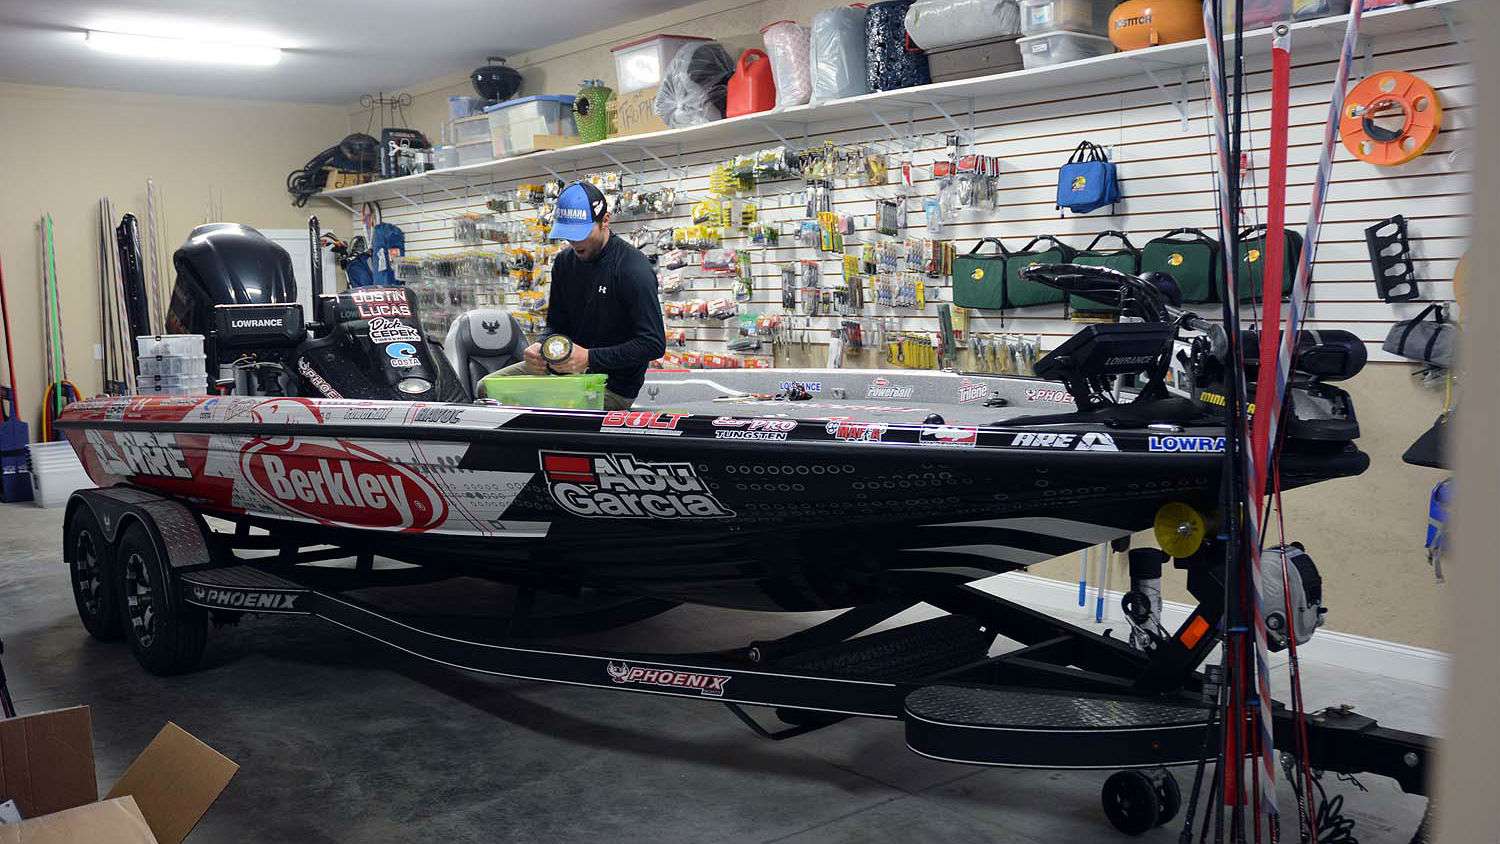 During this visit, Lucas was busy preparing for the season ahead. (The photos were taken prior to the GEICO Bassmaster Classic presented by GoPro.) The boat just got rigged, wrapped and is in need of organizing. Thatâs not a problem for Lucas. 